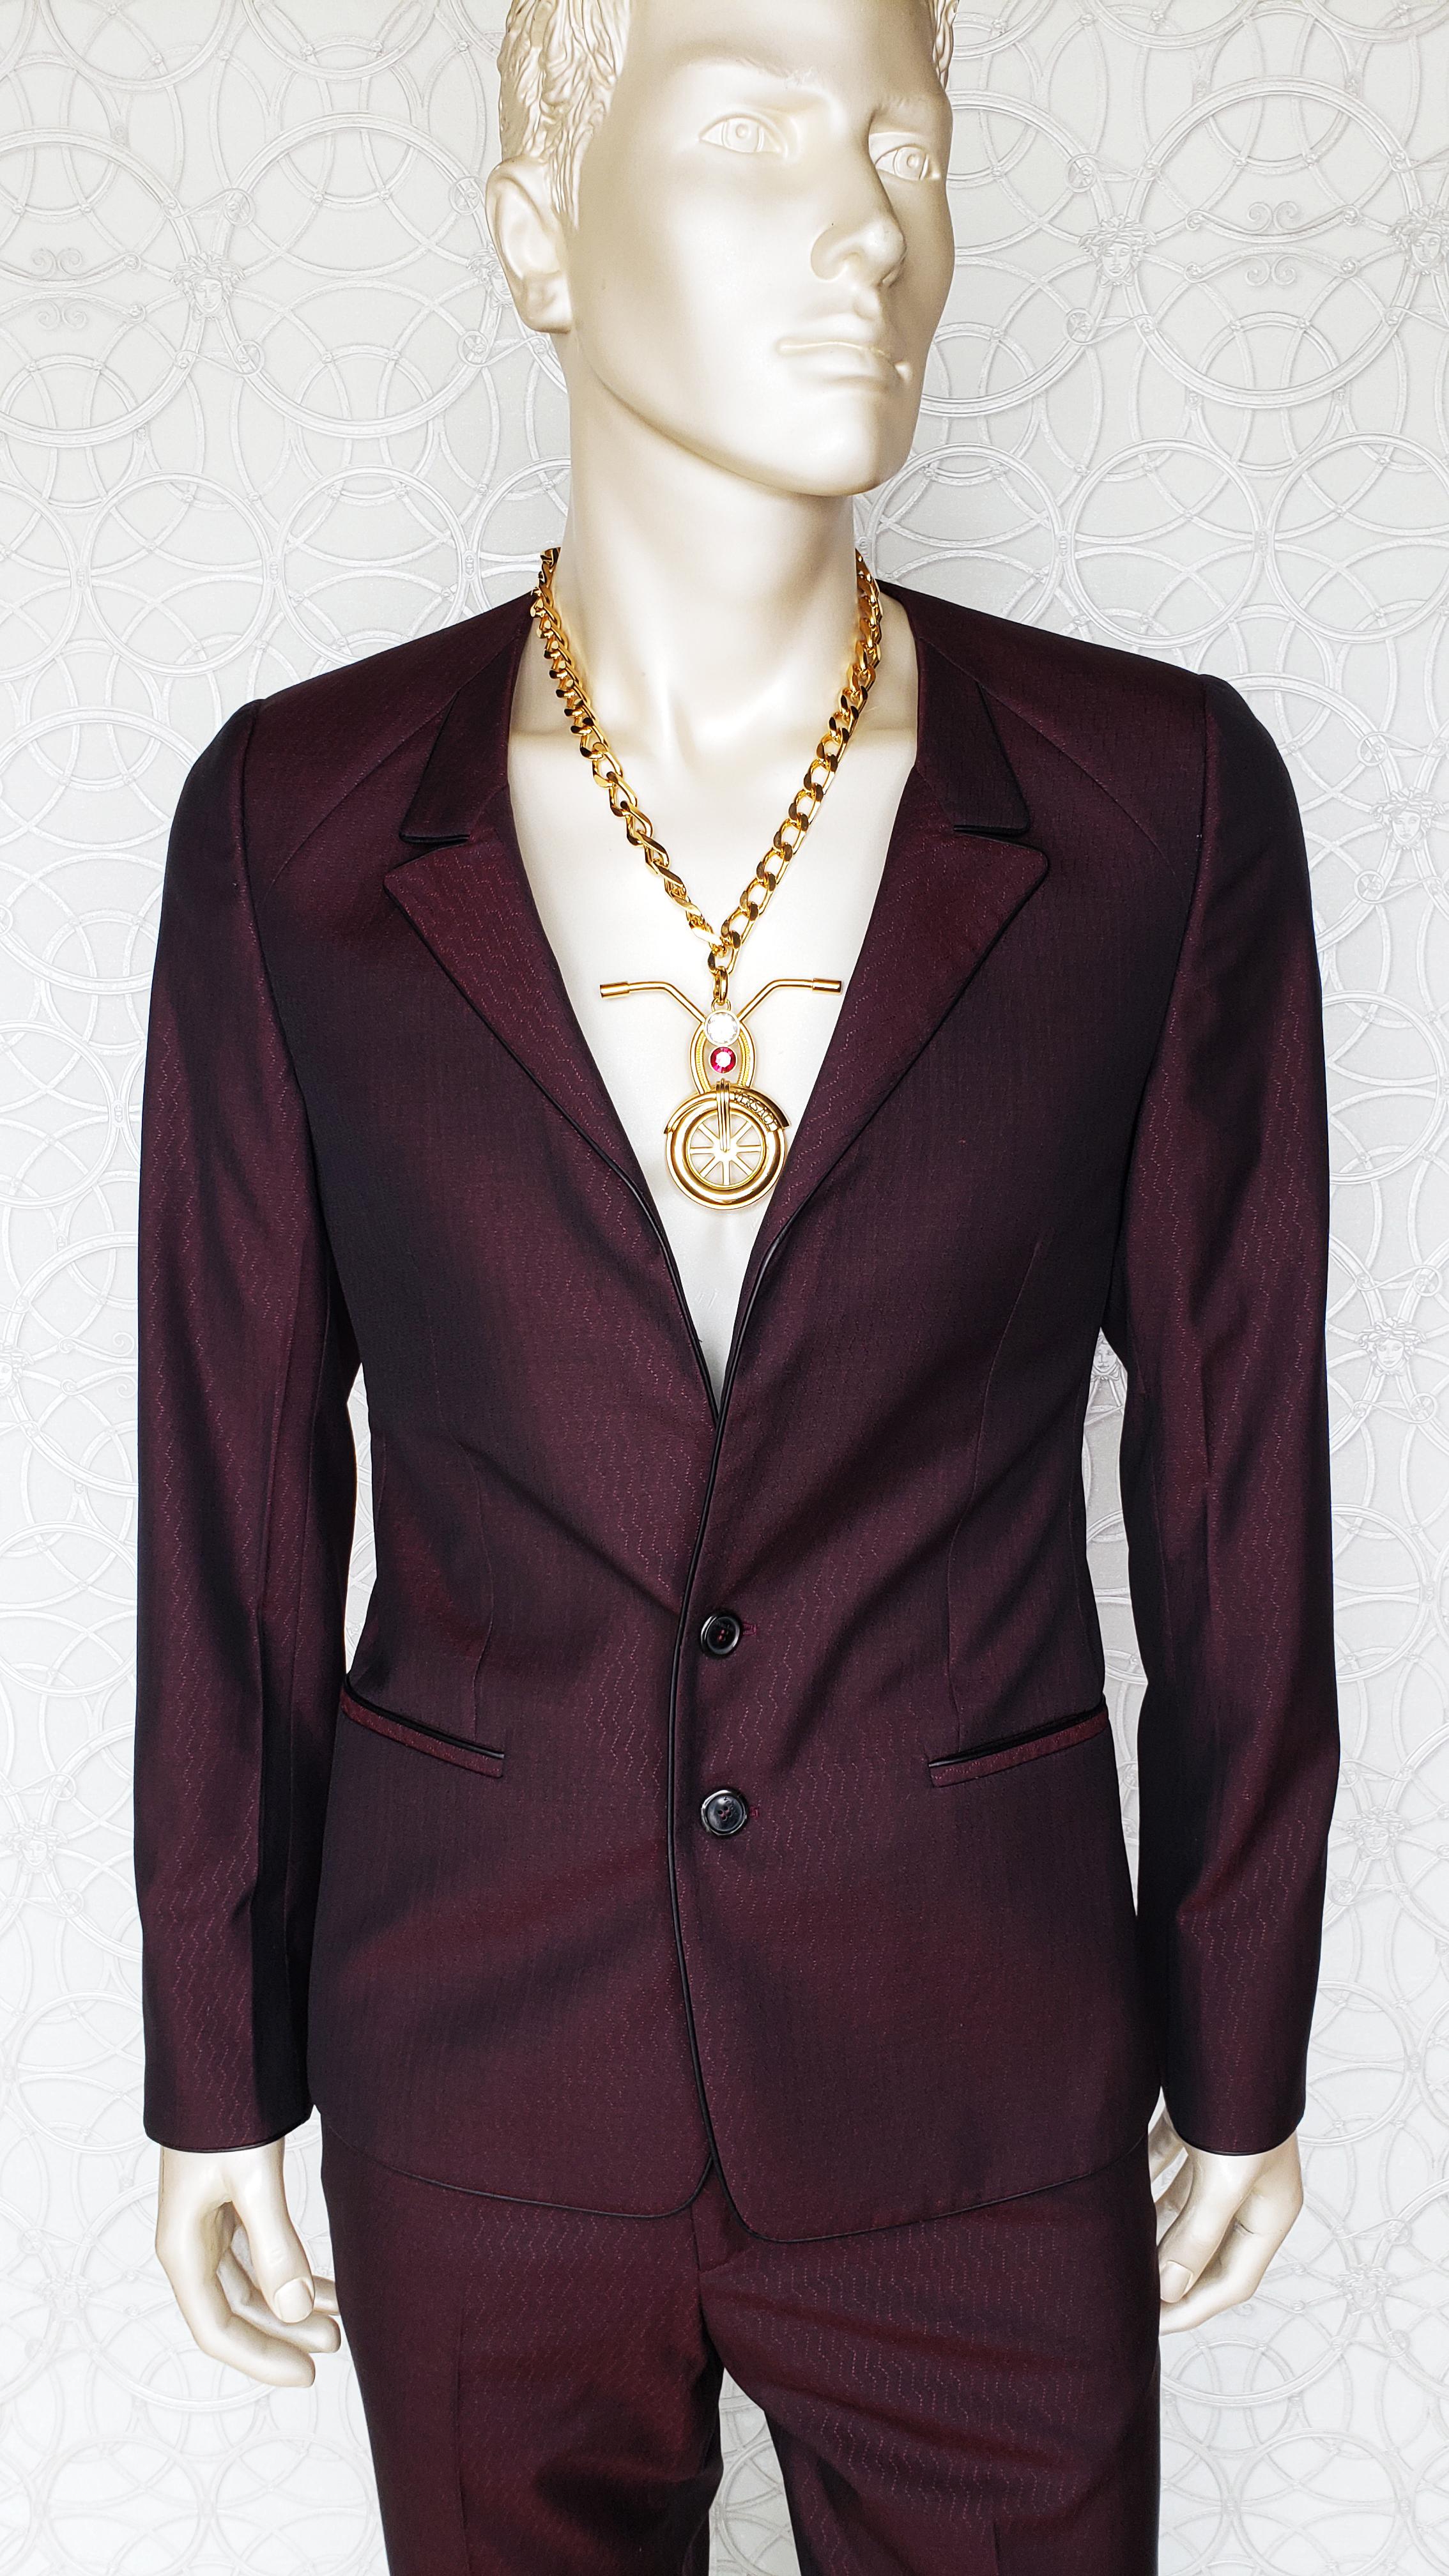 S/S 2011 look #19 NEW VERSACE BURGUNDY WOOL and SILK SUIT 48 - 38 (M) For Sale 3